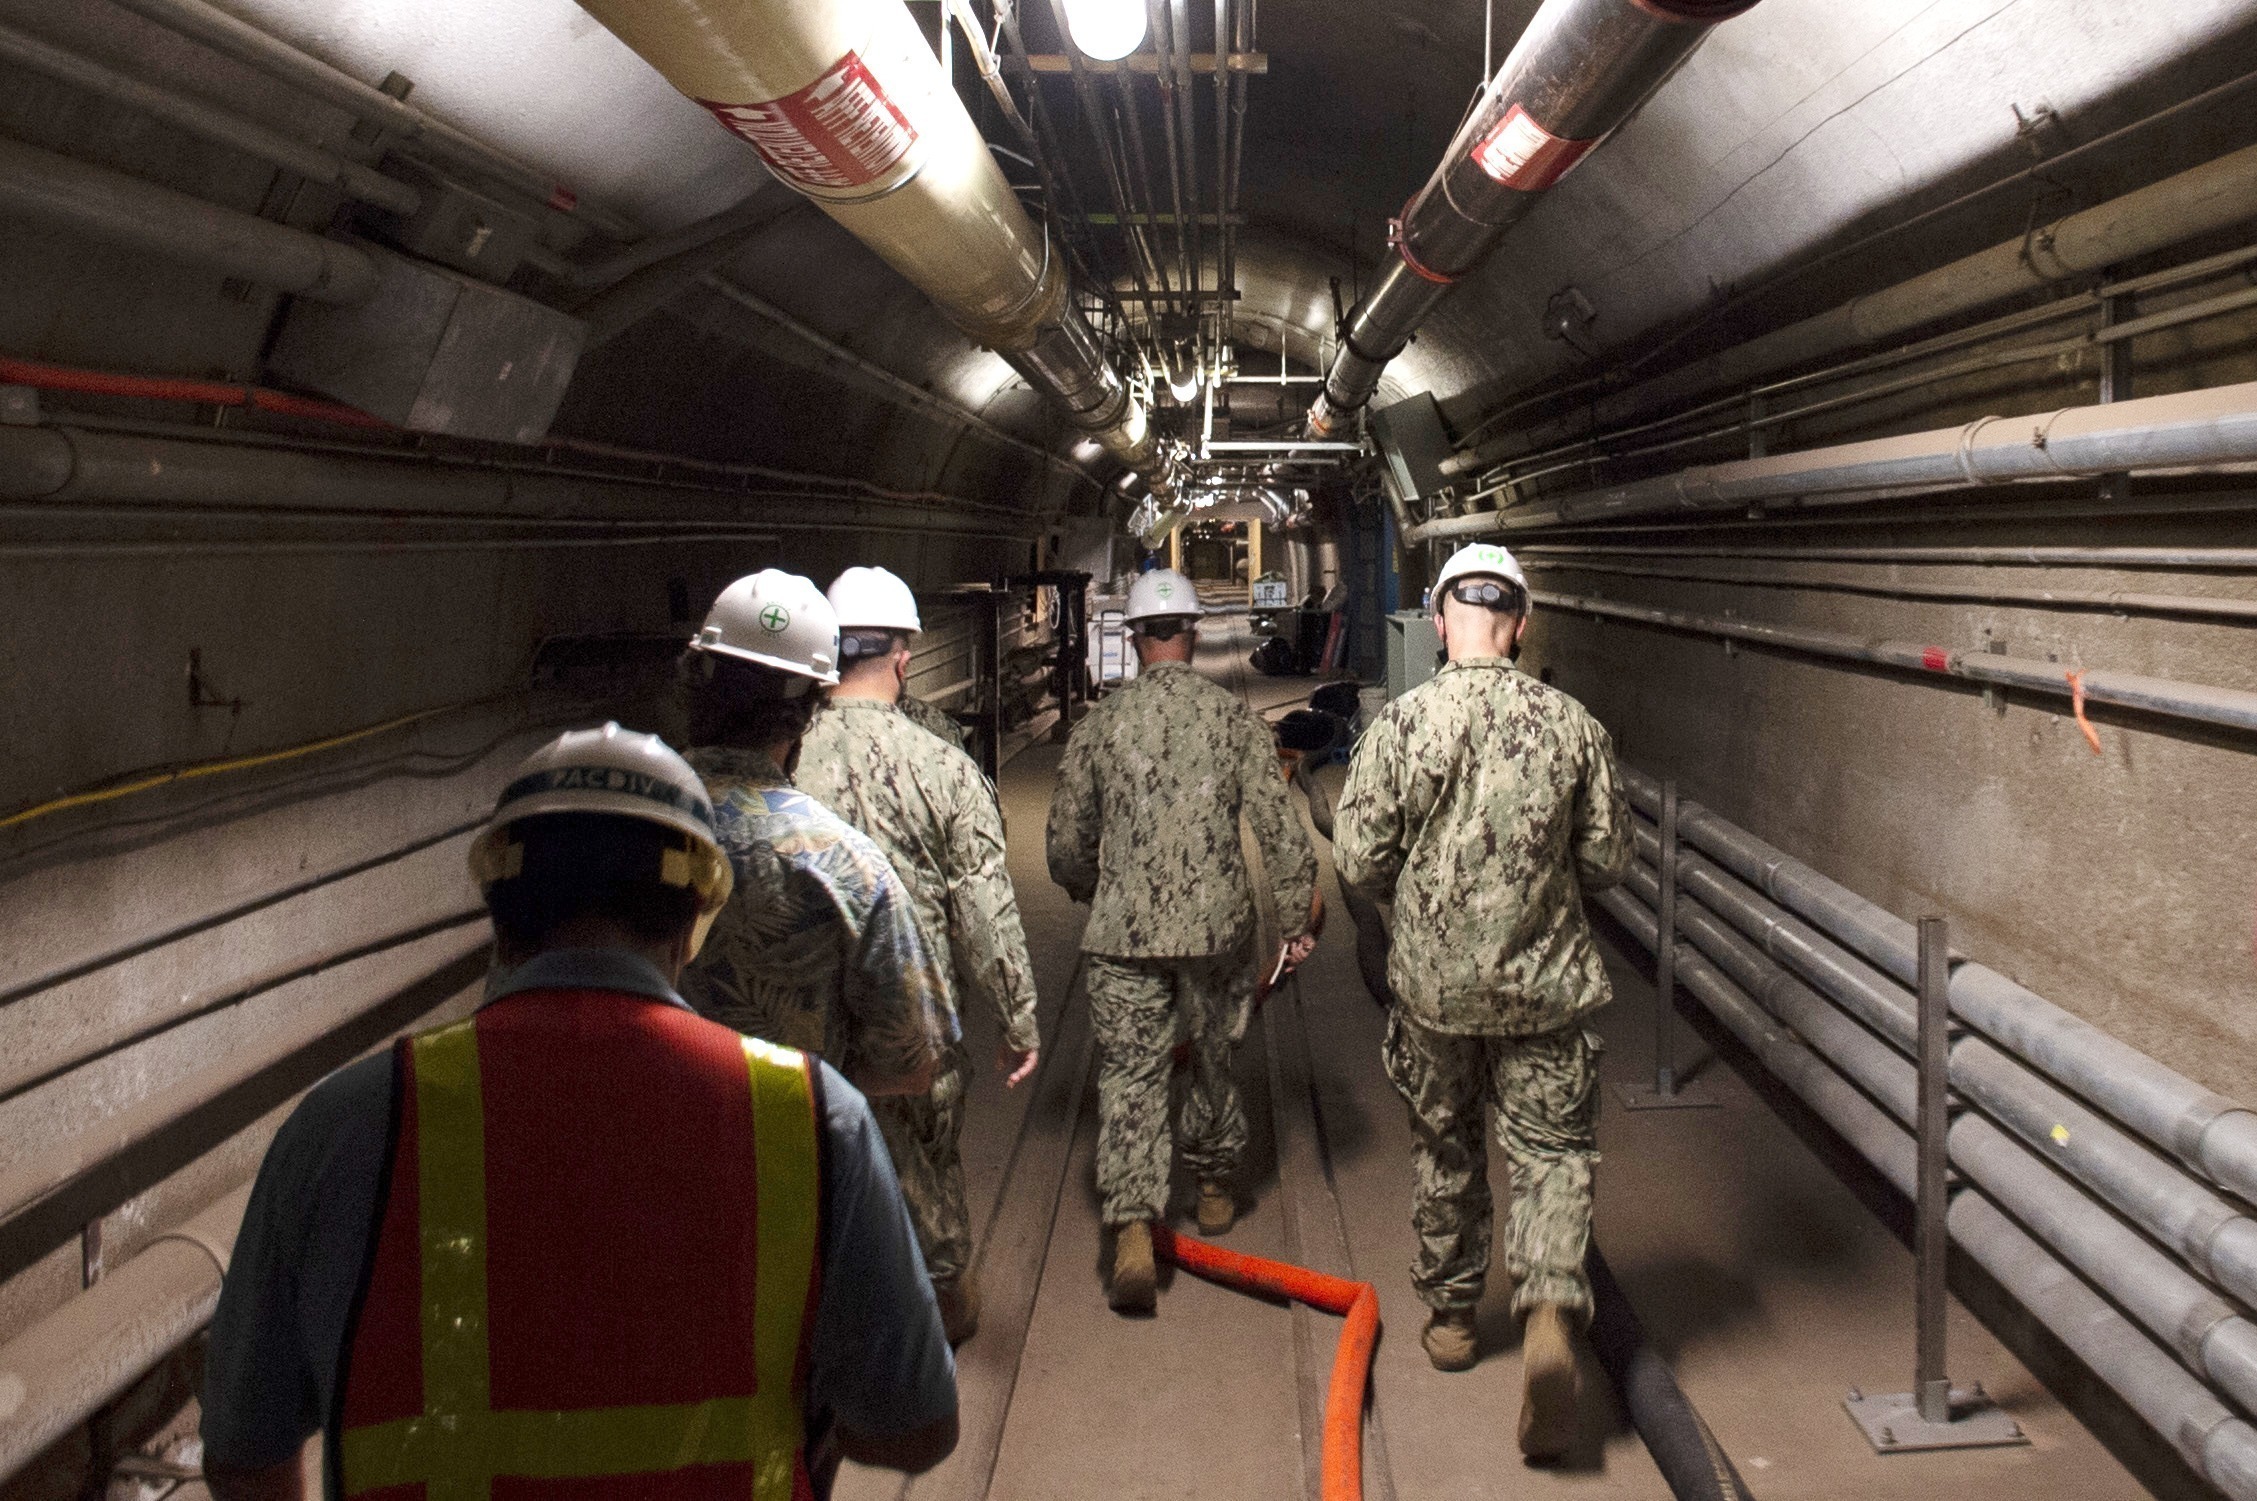 FILE - In this photo provided by the U.S. Navy, Rear Adm. John Korka, Commander, Naval Facilities Engineering Systems Command (NAVFAC), and Chief of Civil Engineers, leads Navy and civilian water quality recovery experts through the tunnels of the Red Hill Bulk Fuel Storage Facility, near Pearl Harbor, Hawaii, Dec. 23, 2021. On Thursday, Sept. 28, 2023, the Navy issued written reprimands to three now-retired military officers for their roles in the spill of jet fuel into Pearl Harbor's drinking water in 2021, but did not fire, suspend, dock the pay or reduce the rank of anyone for the incident. (Petty Officer 1st Class Luke McCall/U.S. Navy via AP, File)